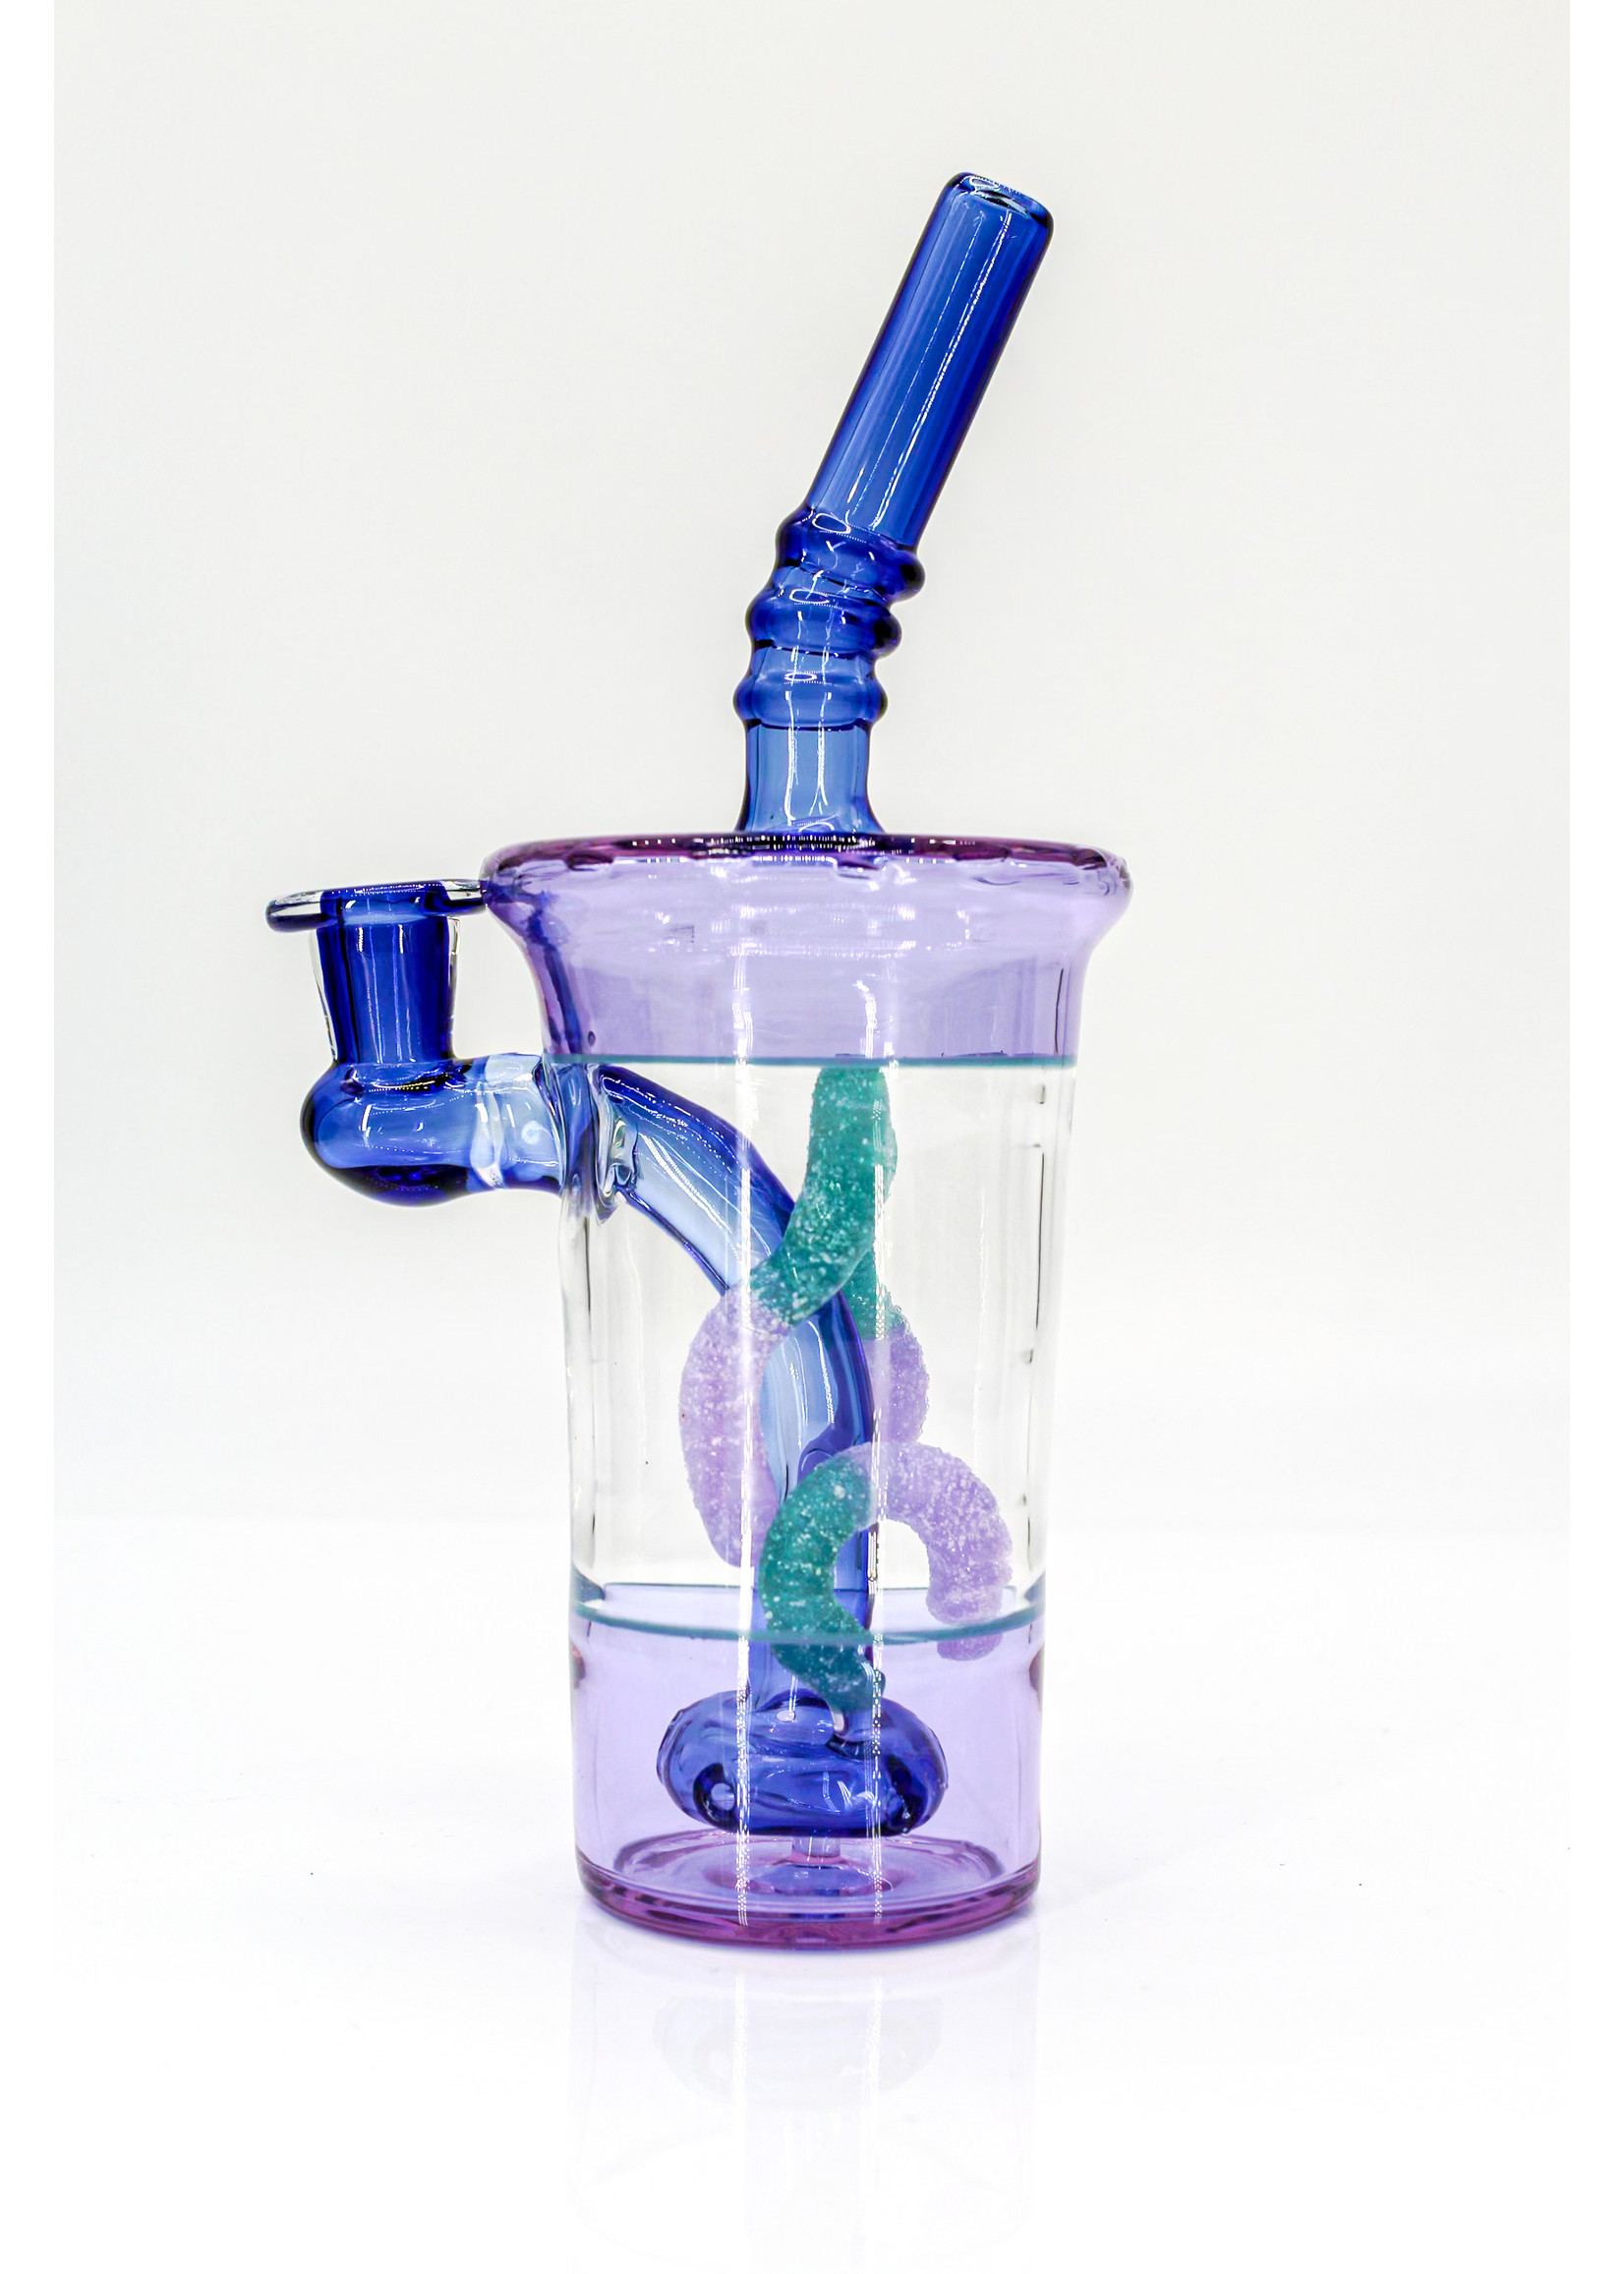 Emperial Glass Emperial Glass Cup Rig #1 2022